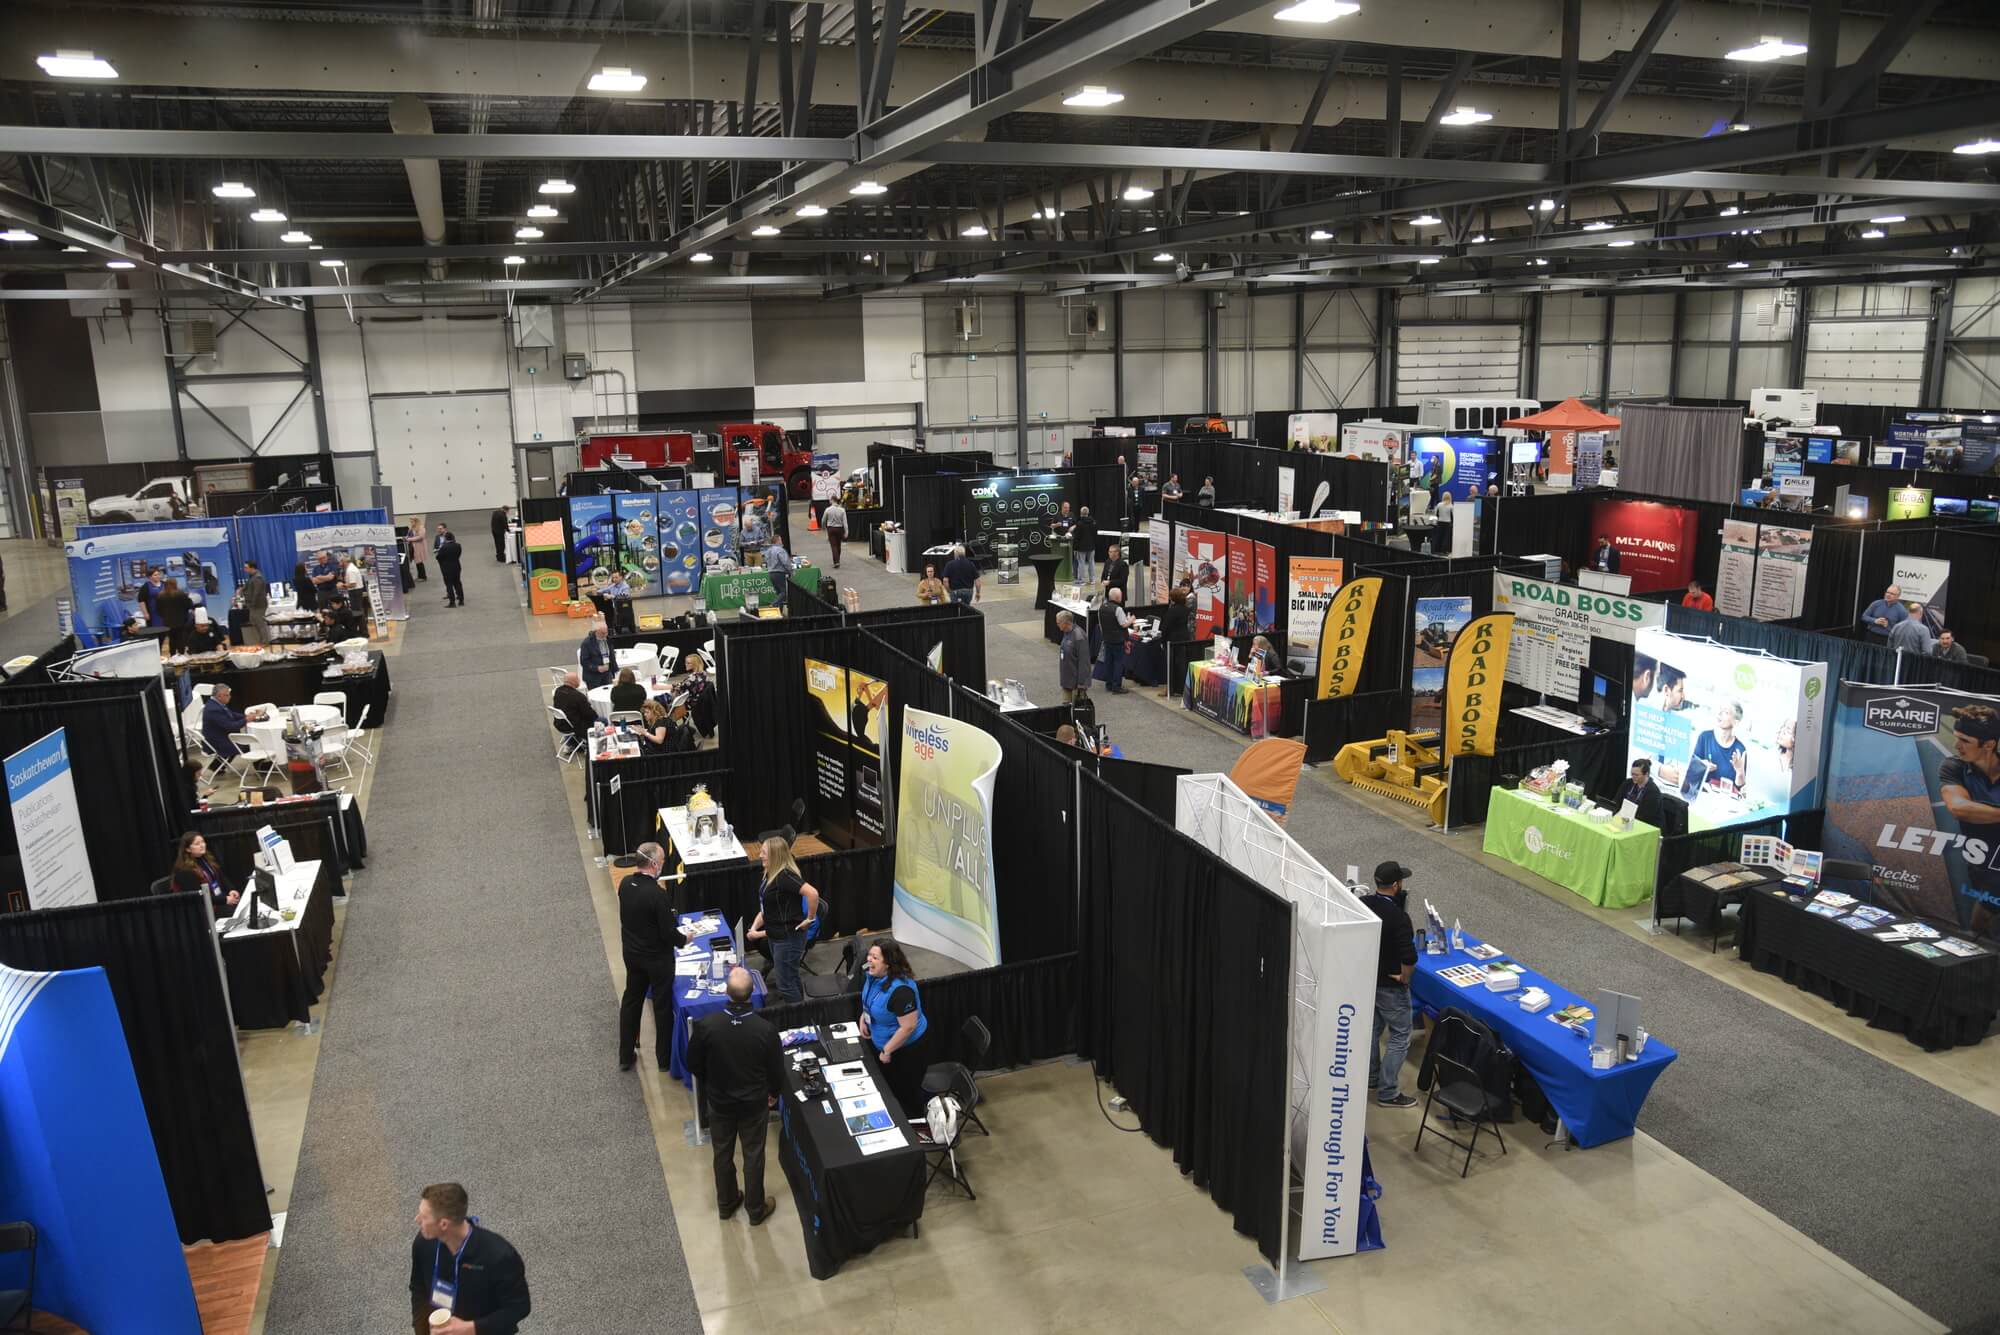 Overview of the exhibitor hall at the 2022 Canada's Farm Show